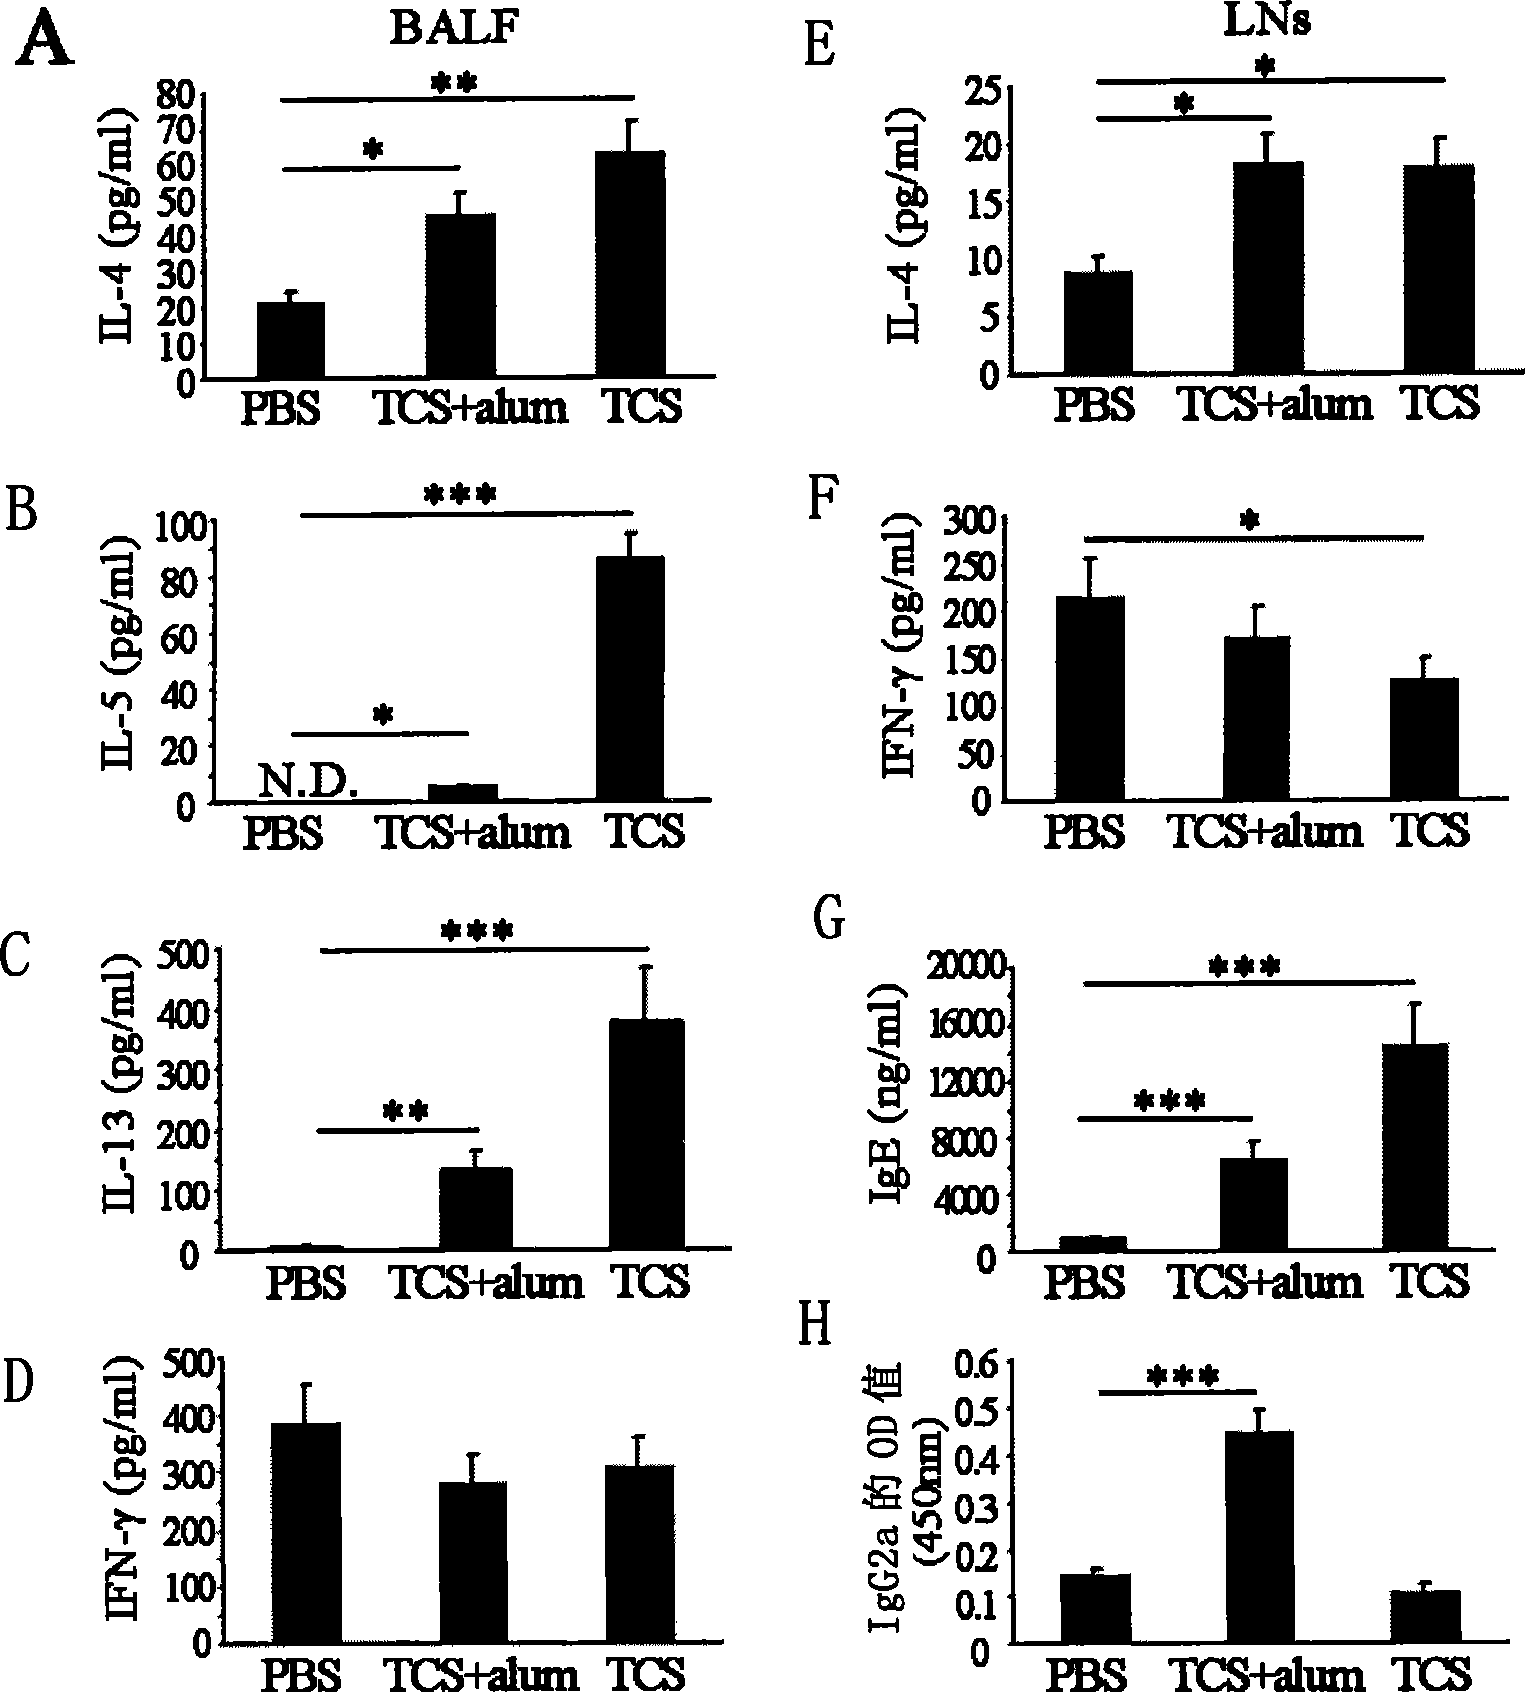 Trichosanthin protein induced mouse allelgic asthma disease model